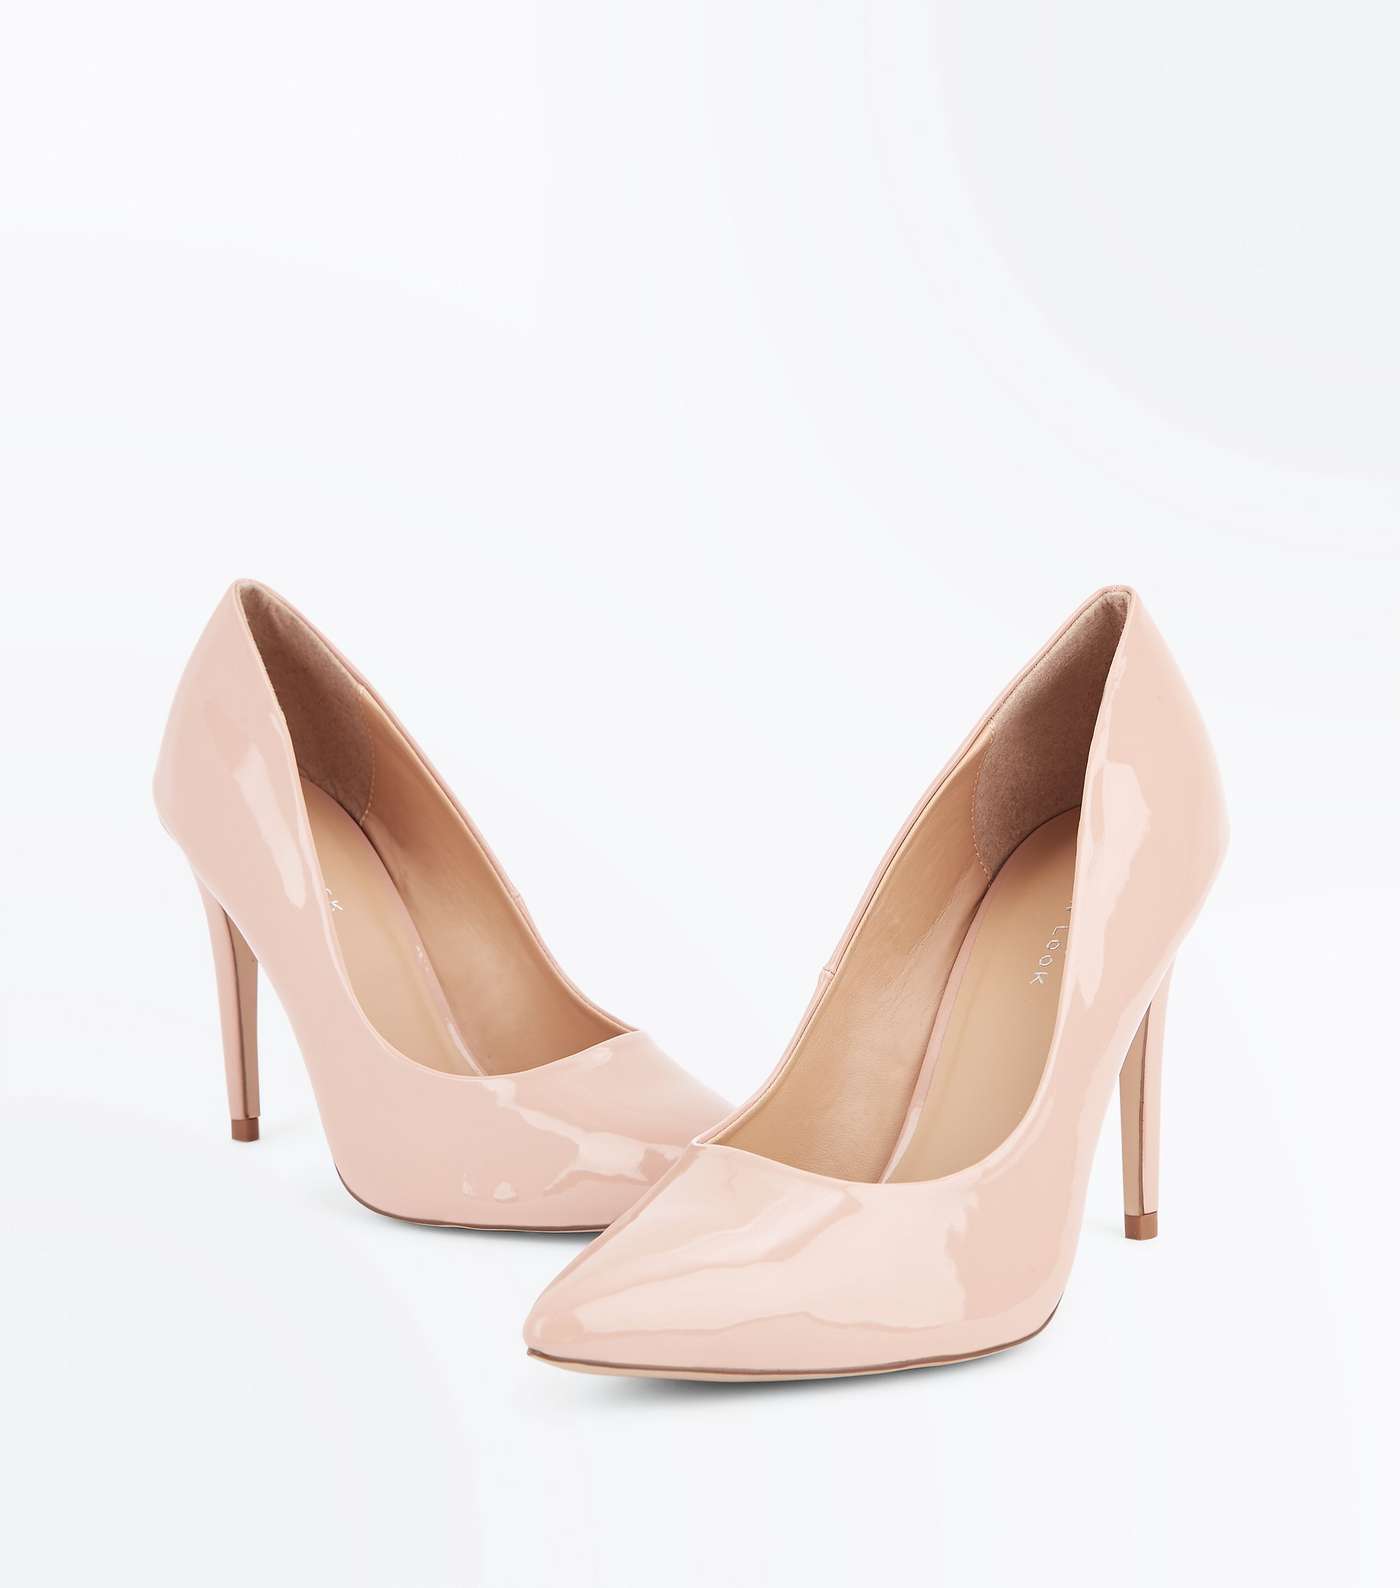 Nude Patent Pointed Court Shoes Image 4